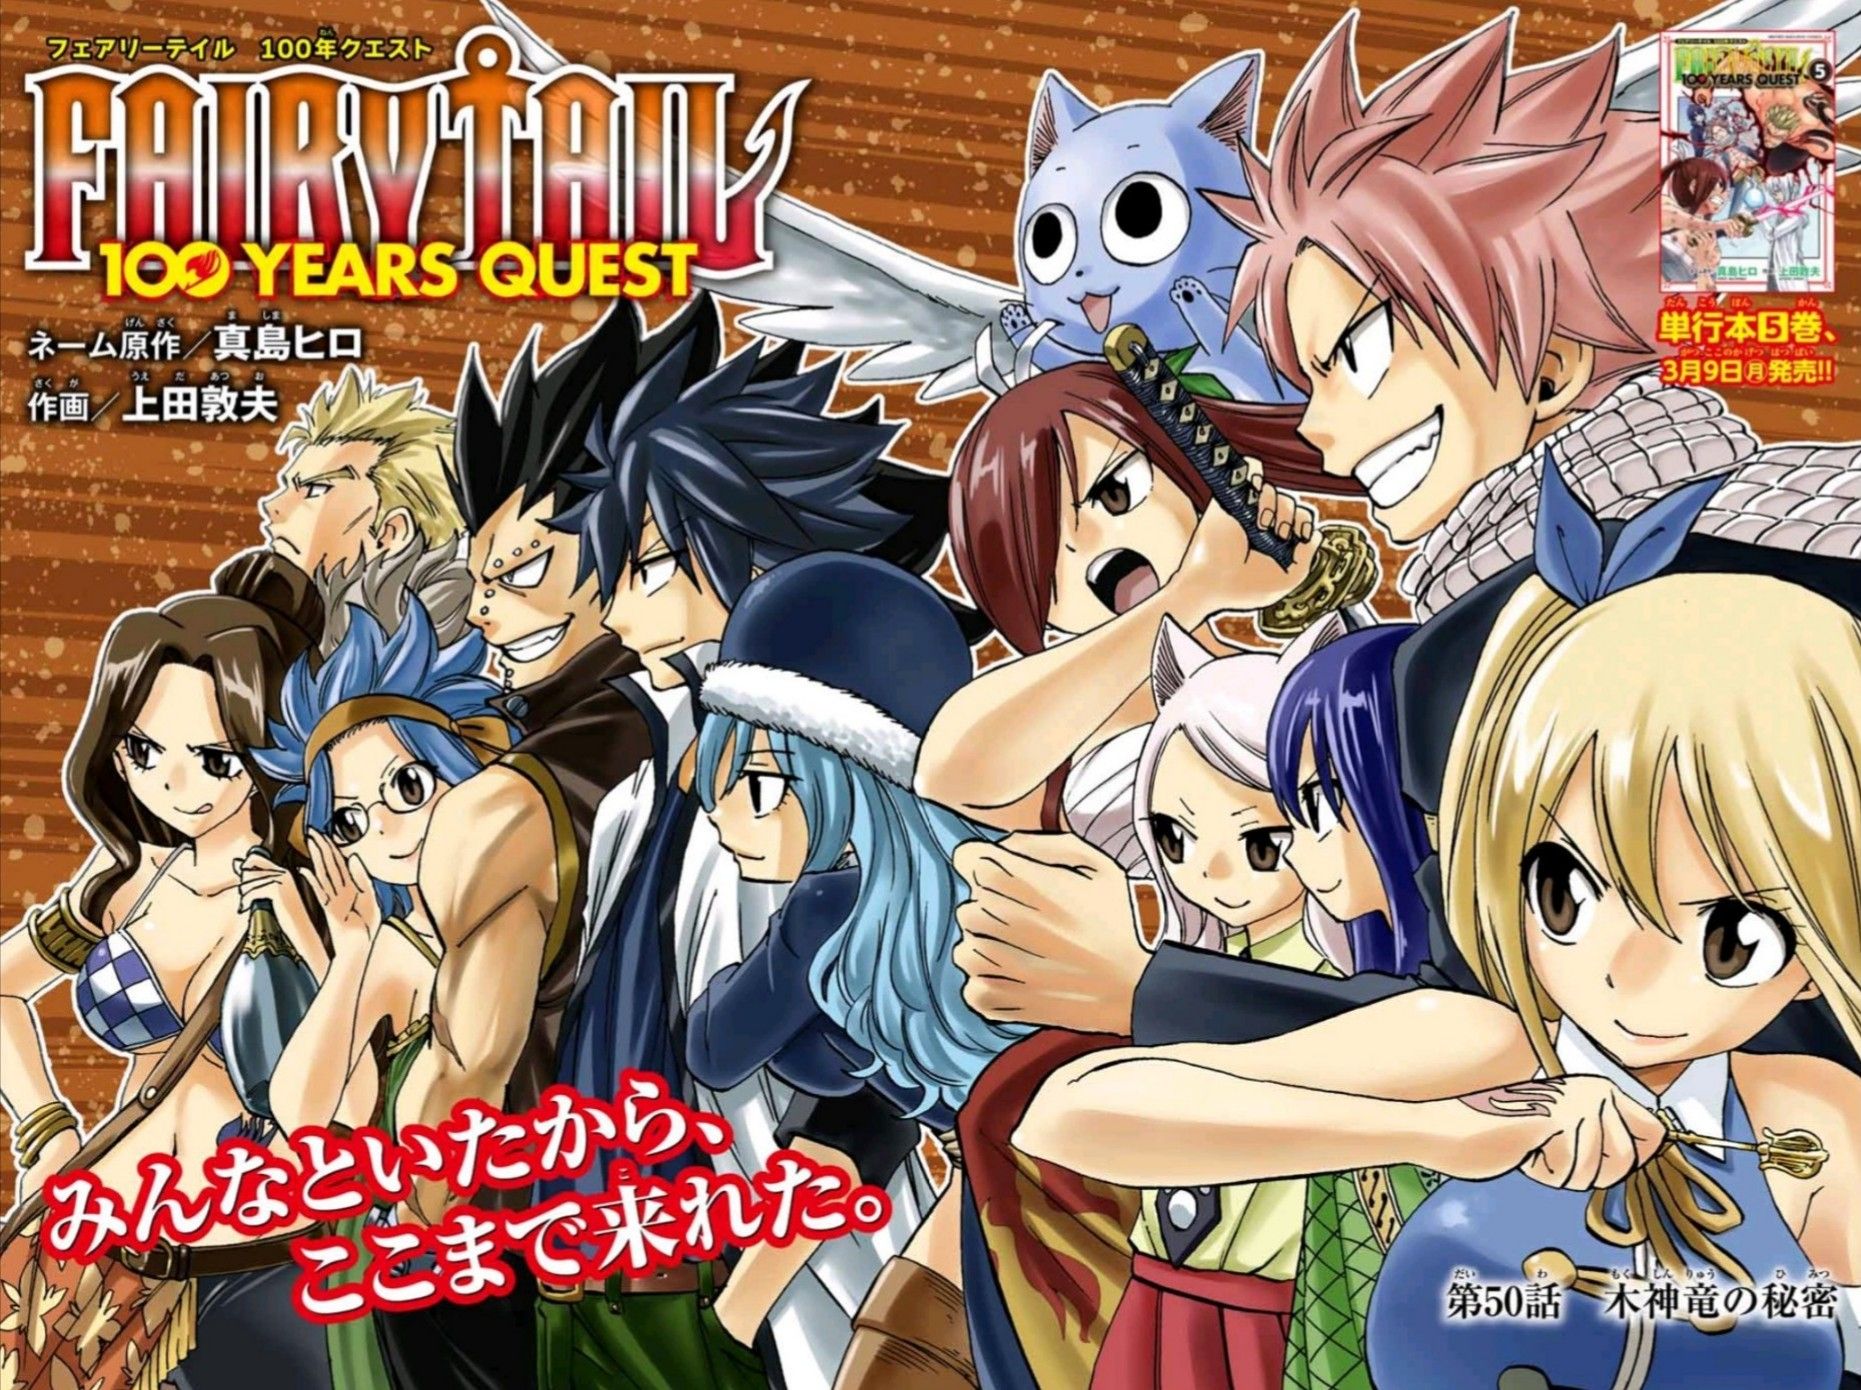 Quest fairy tail 100 years Fairy Tail